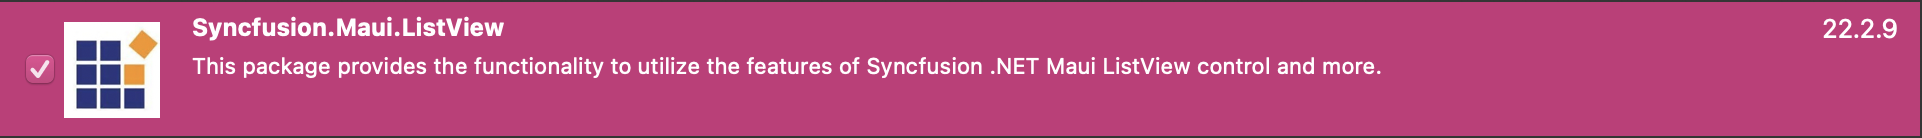 Add the Syncfusion.Maui.ListView NuGet package